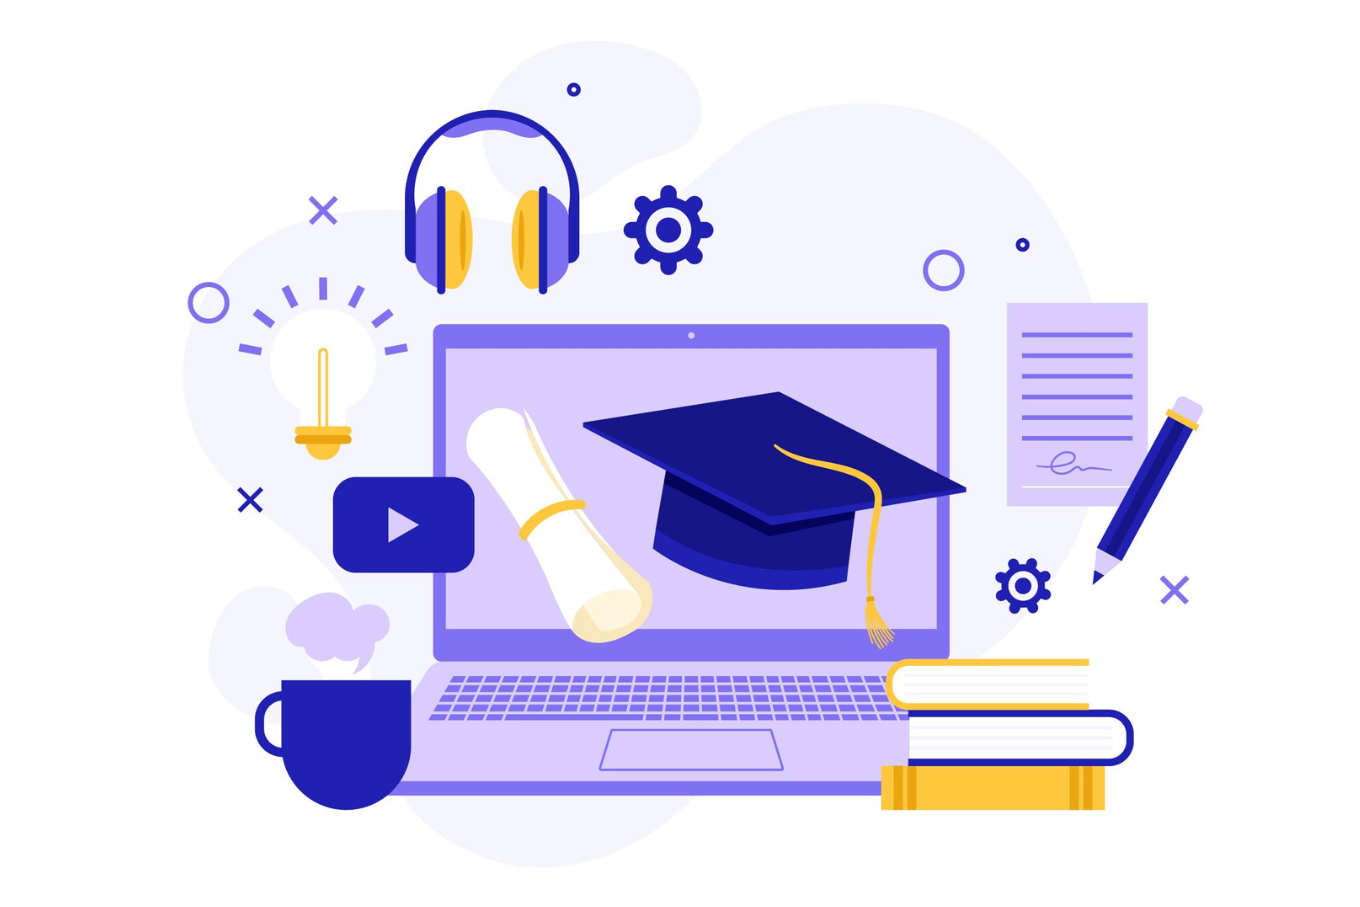 Online education symbols including a laptop displaying a graduation cap and diploma, headphones, a lightbulb, a cup, a book stack, a gear, a paper with a pen, and a video play icon